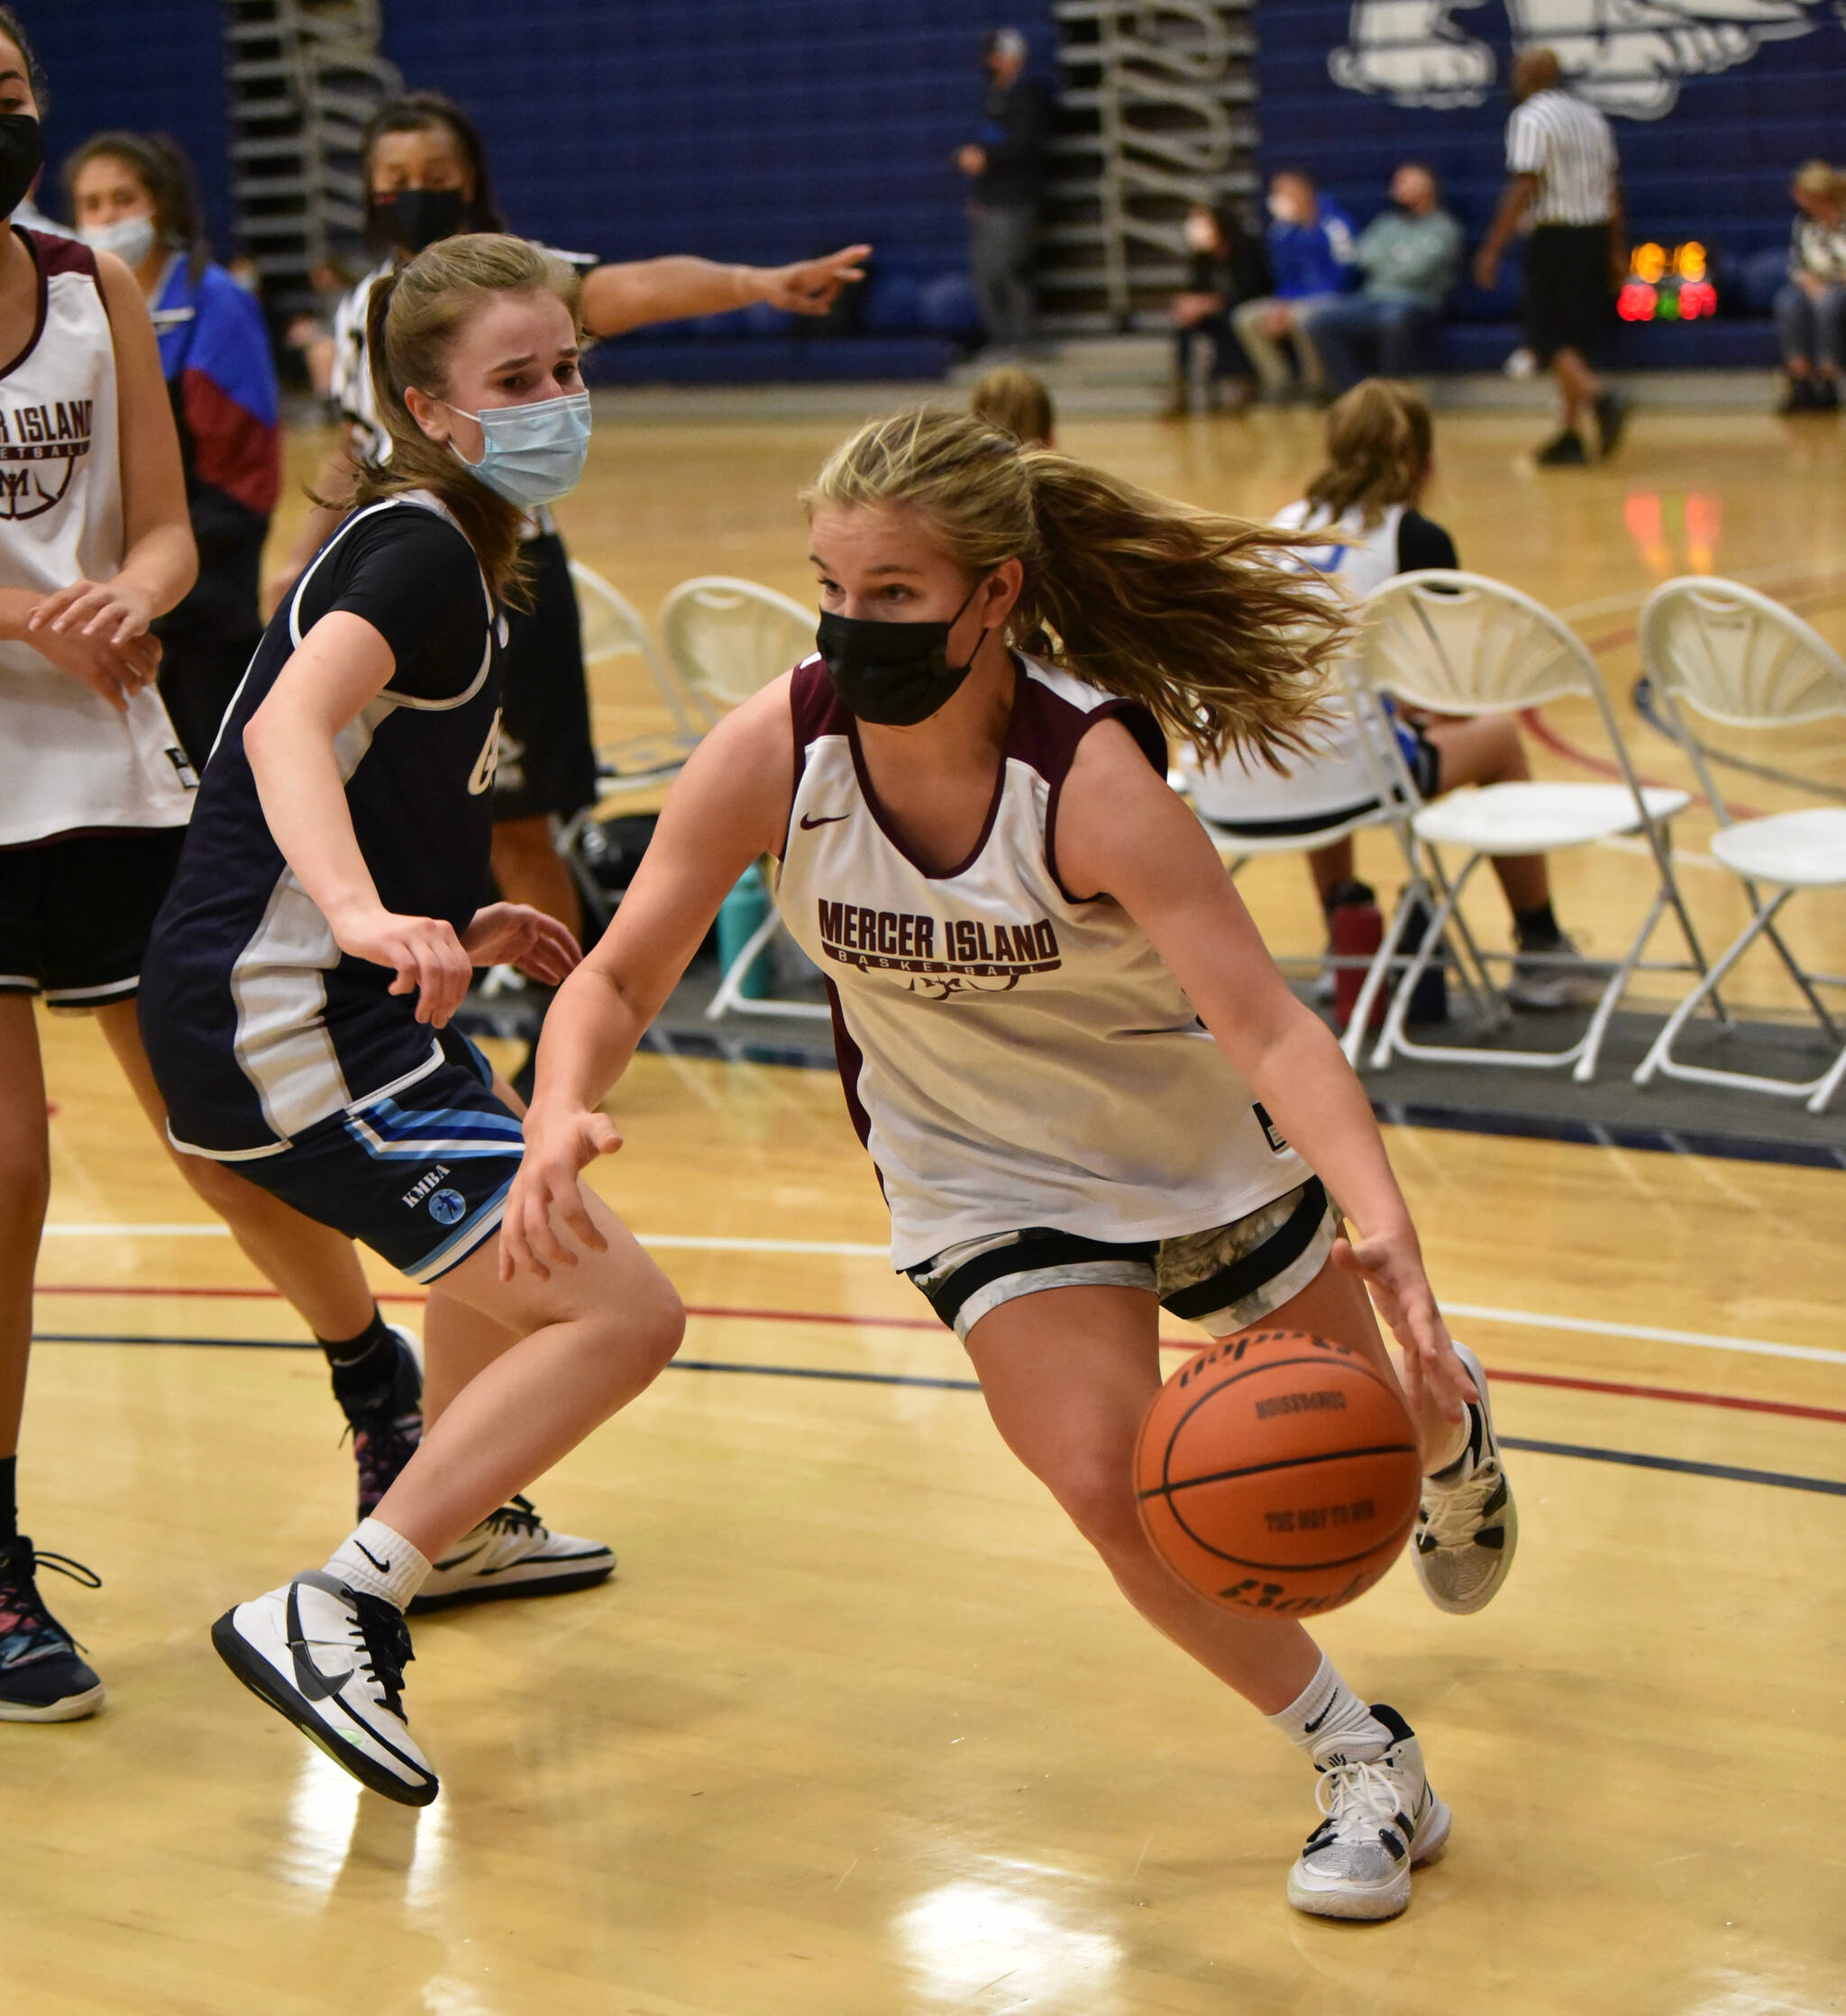 Mercer Island High School junior captain Caley Newcomer is the team’s starting guard/point guard. Photo courtesy of Brad Newcomer